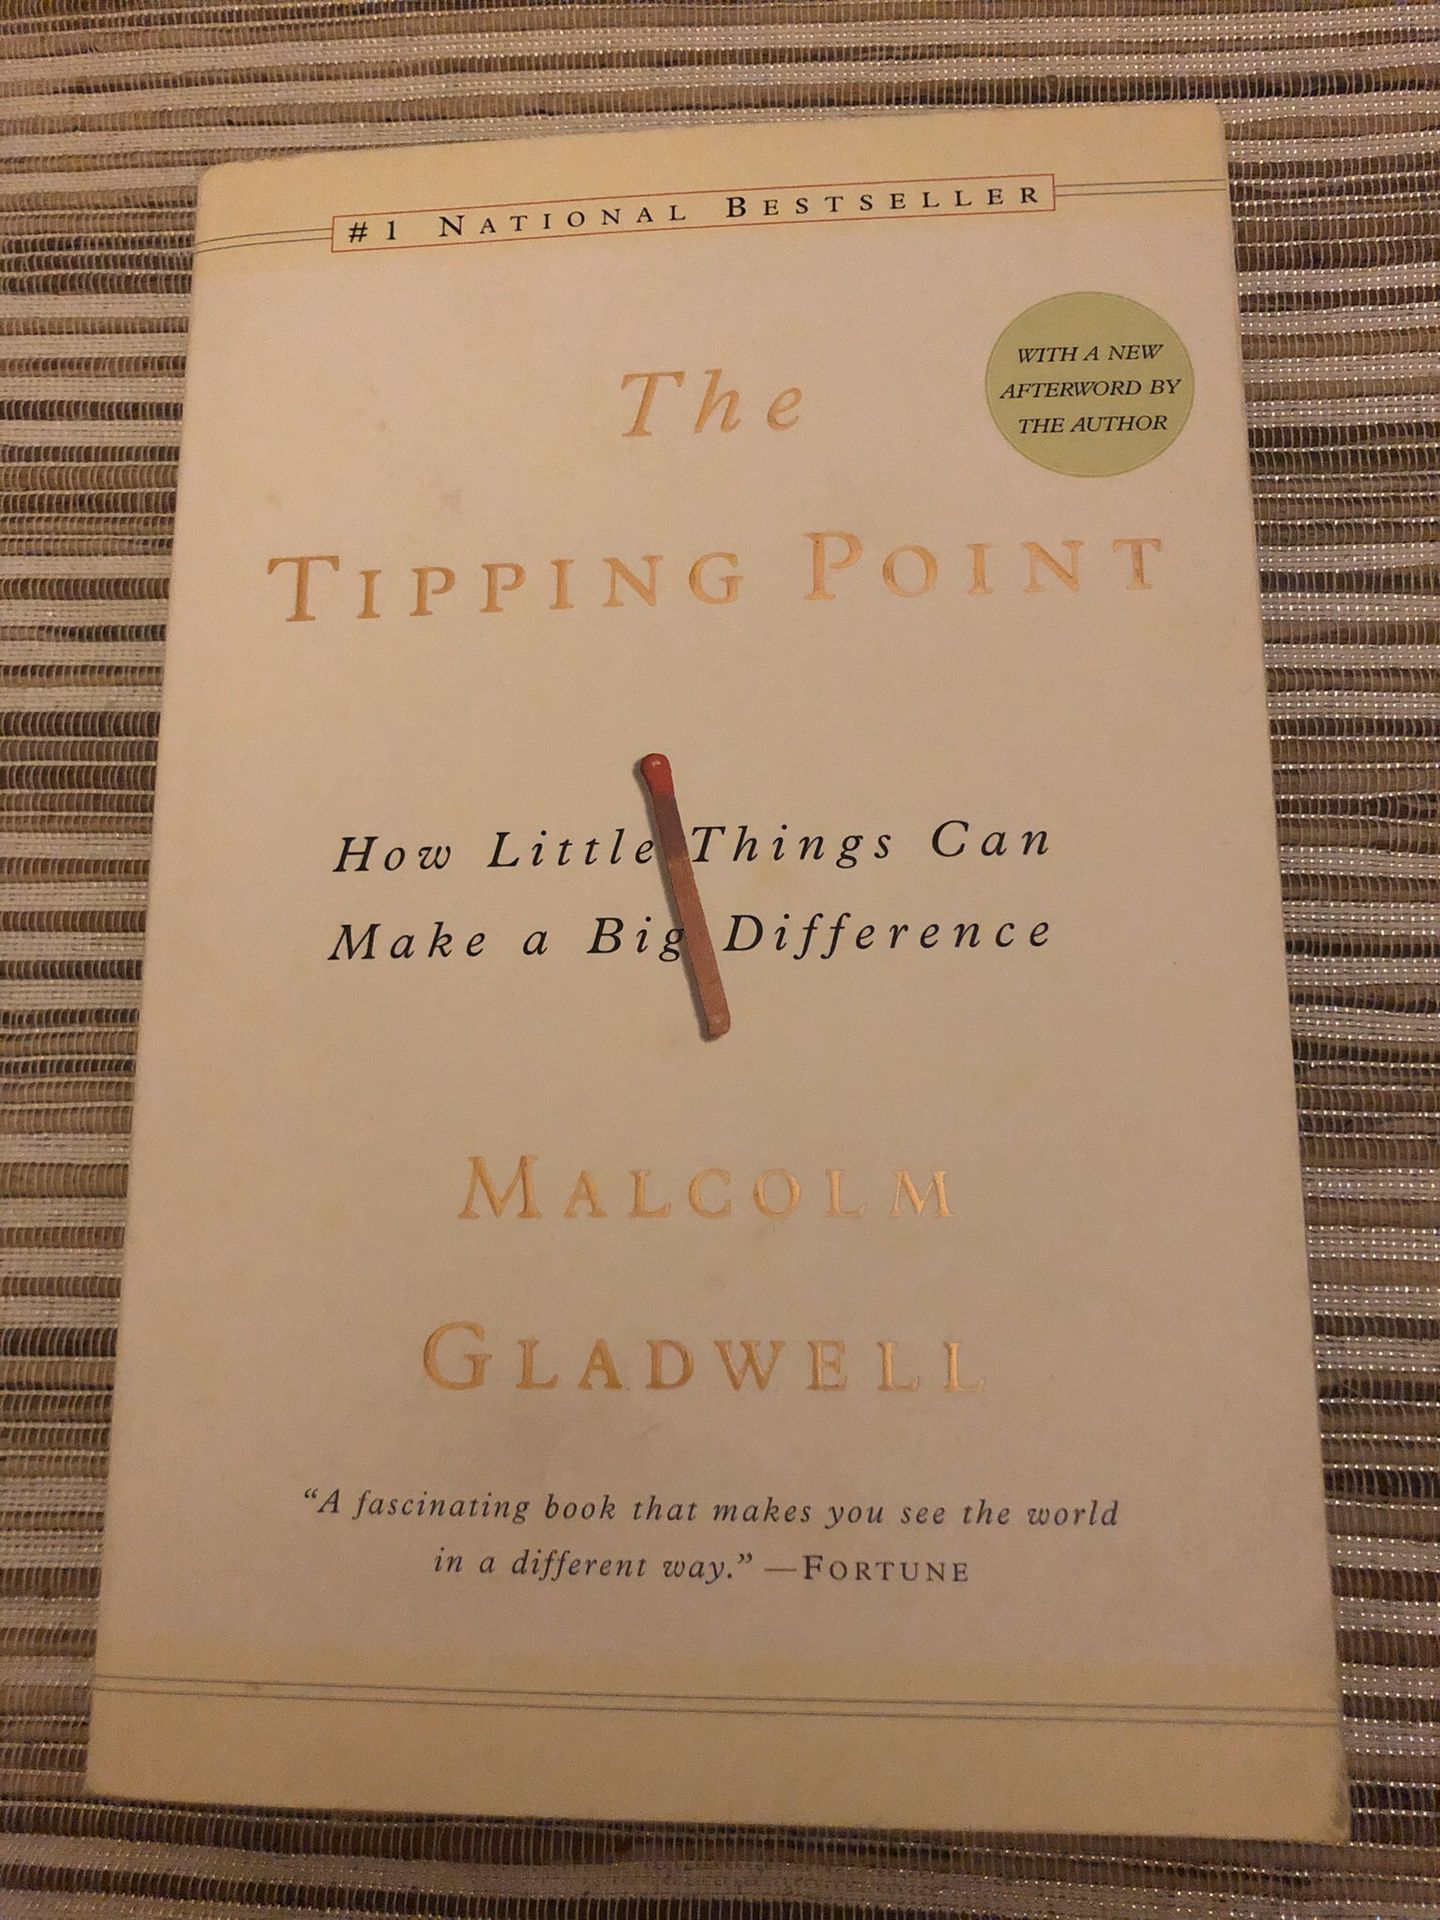 One of “must read” books - Malcolm Gladwell “The Tipping Point”